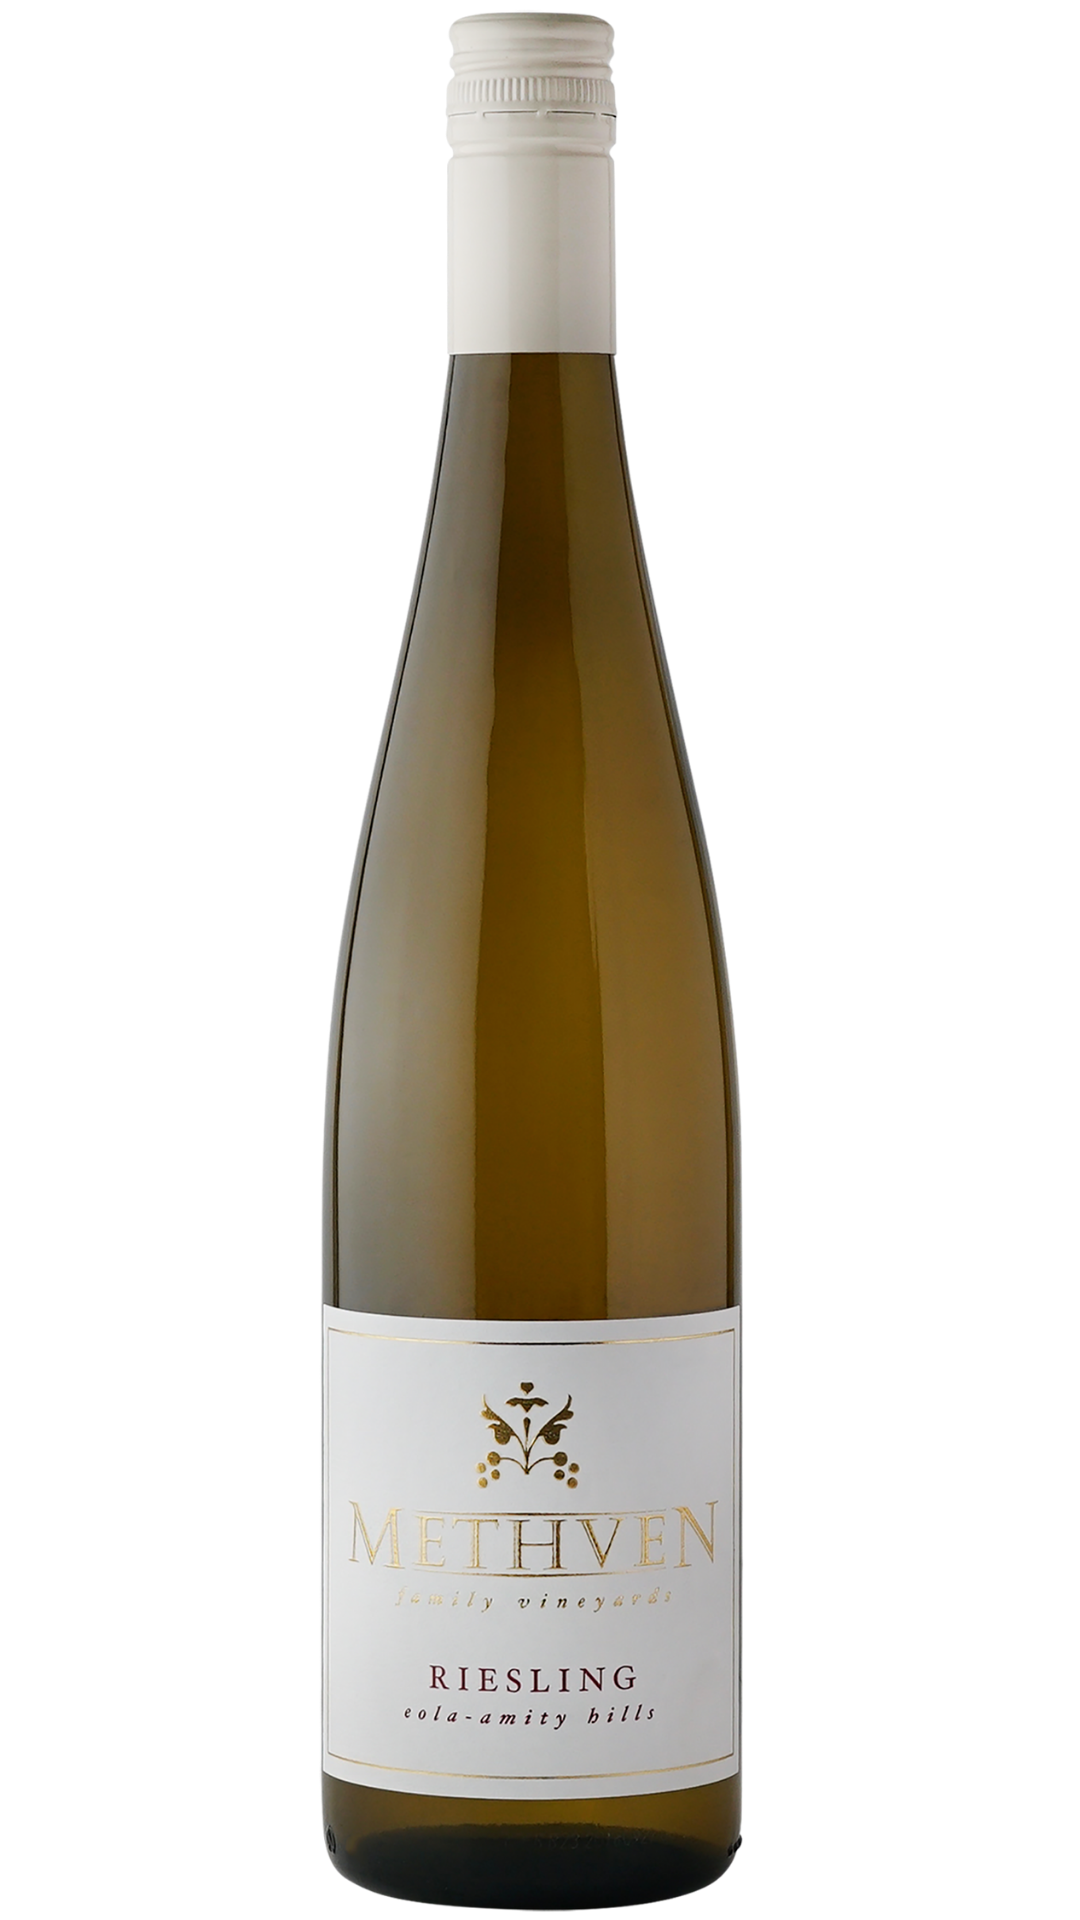 Product Image for 2021 Dry Riesling